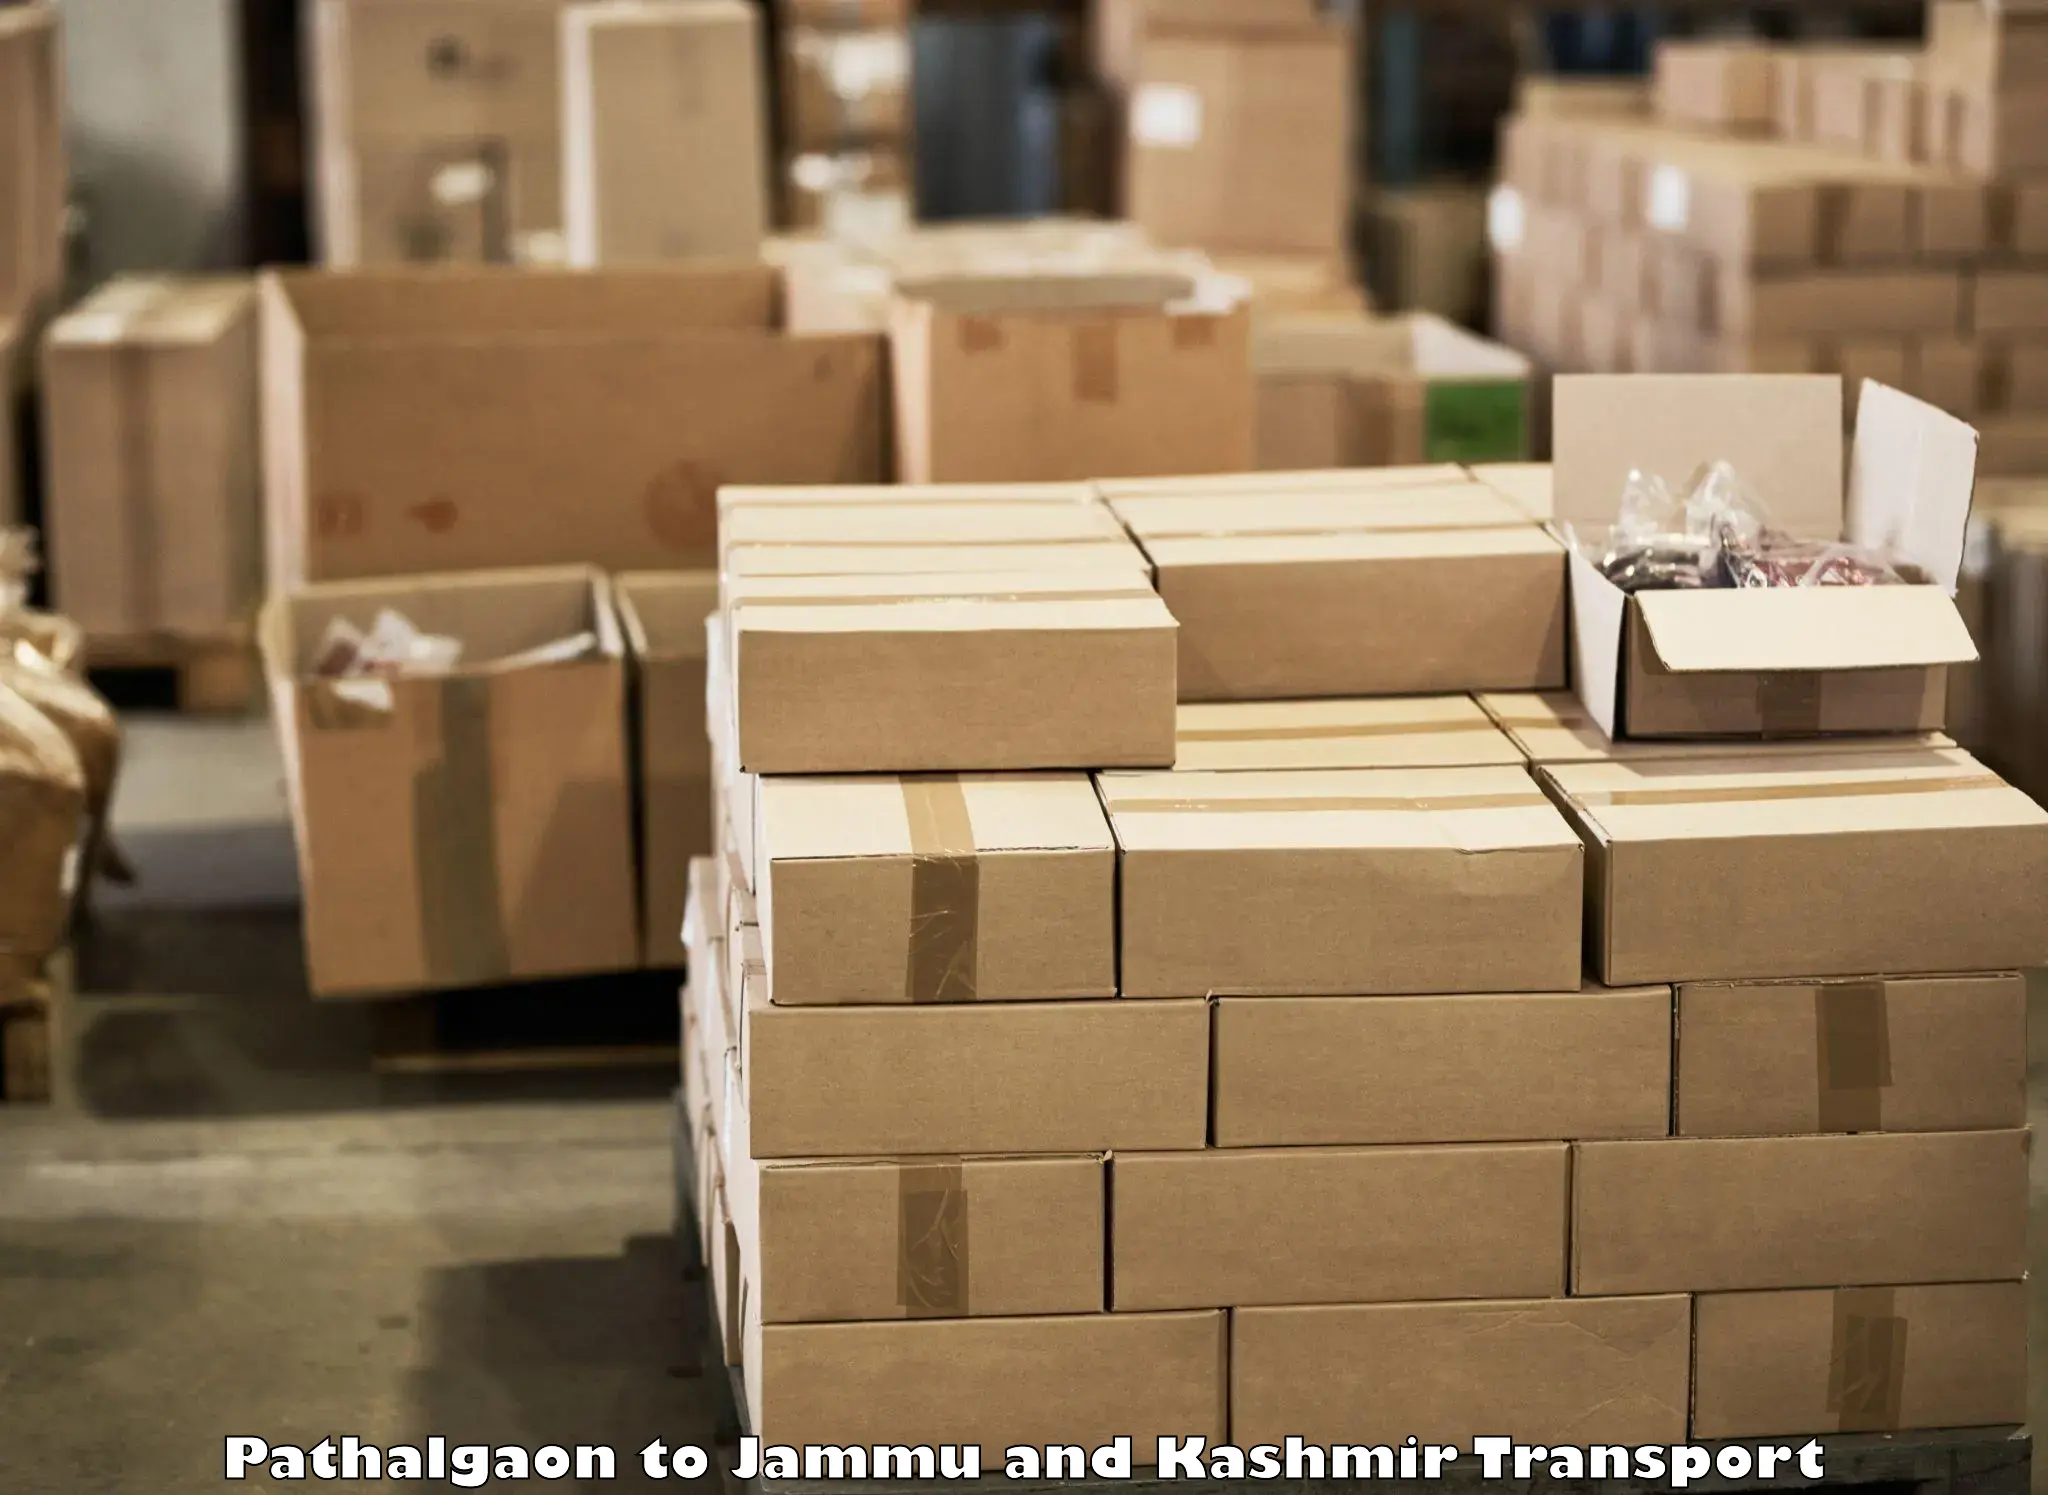 Container transport service Pathalgaon to Jammu and Kashmir